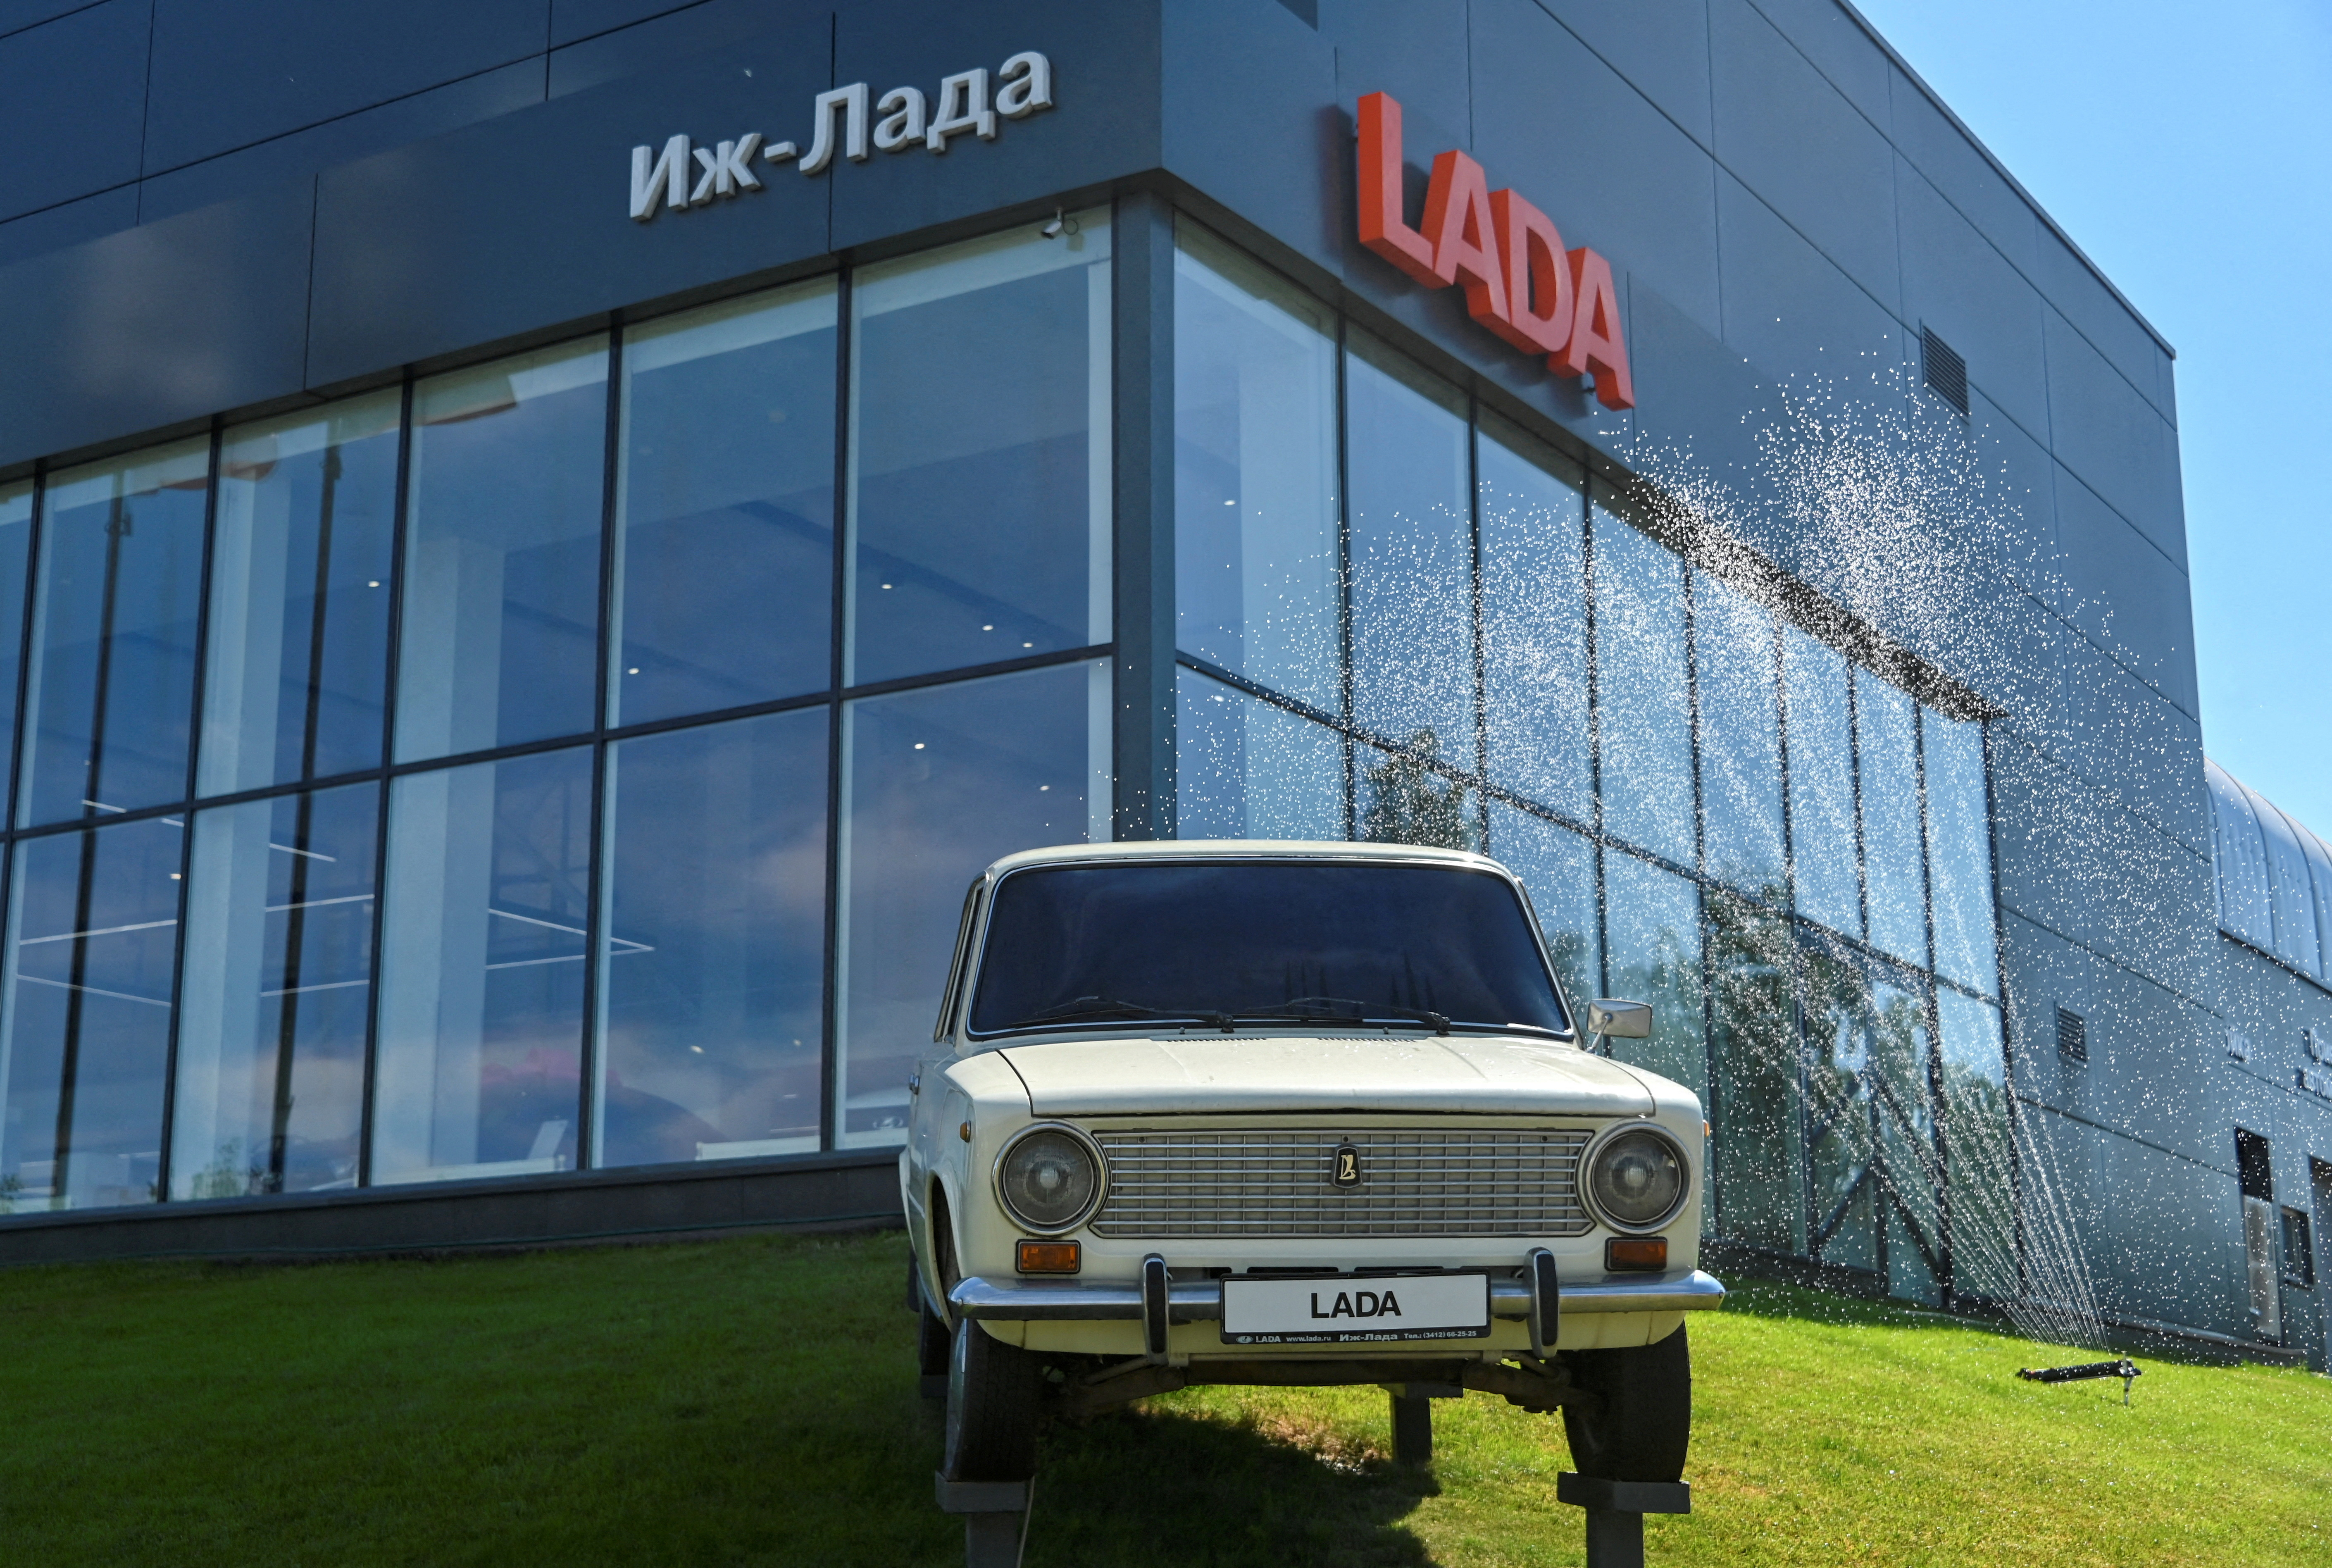 A view shows Izh-Lada dealership in the city of Izhevsk